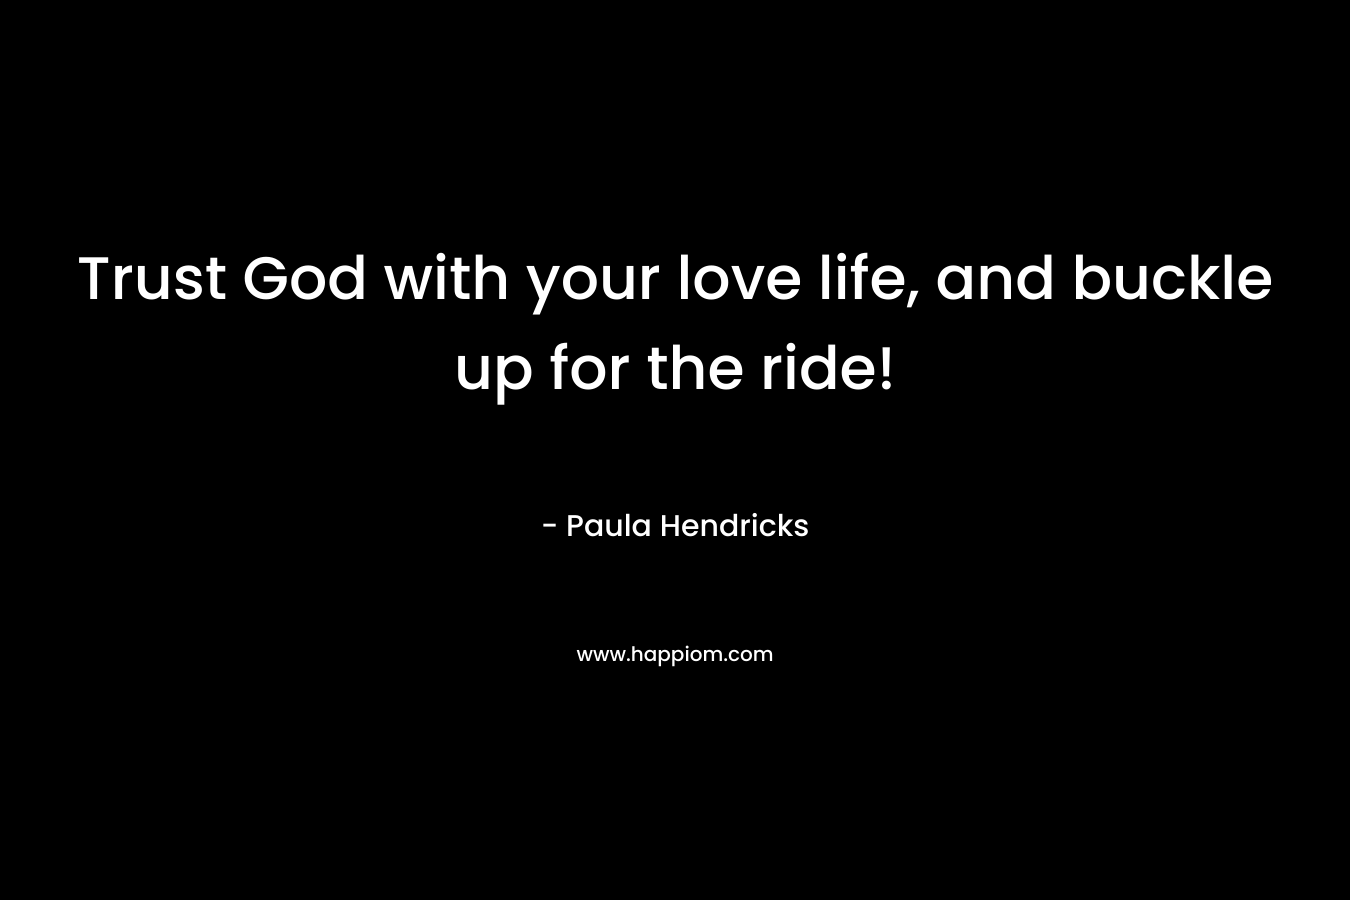 Trust God with your love life, and buckle up for the ride! – Paula Hendricks